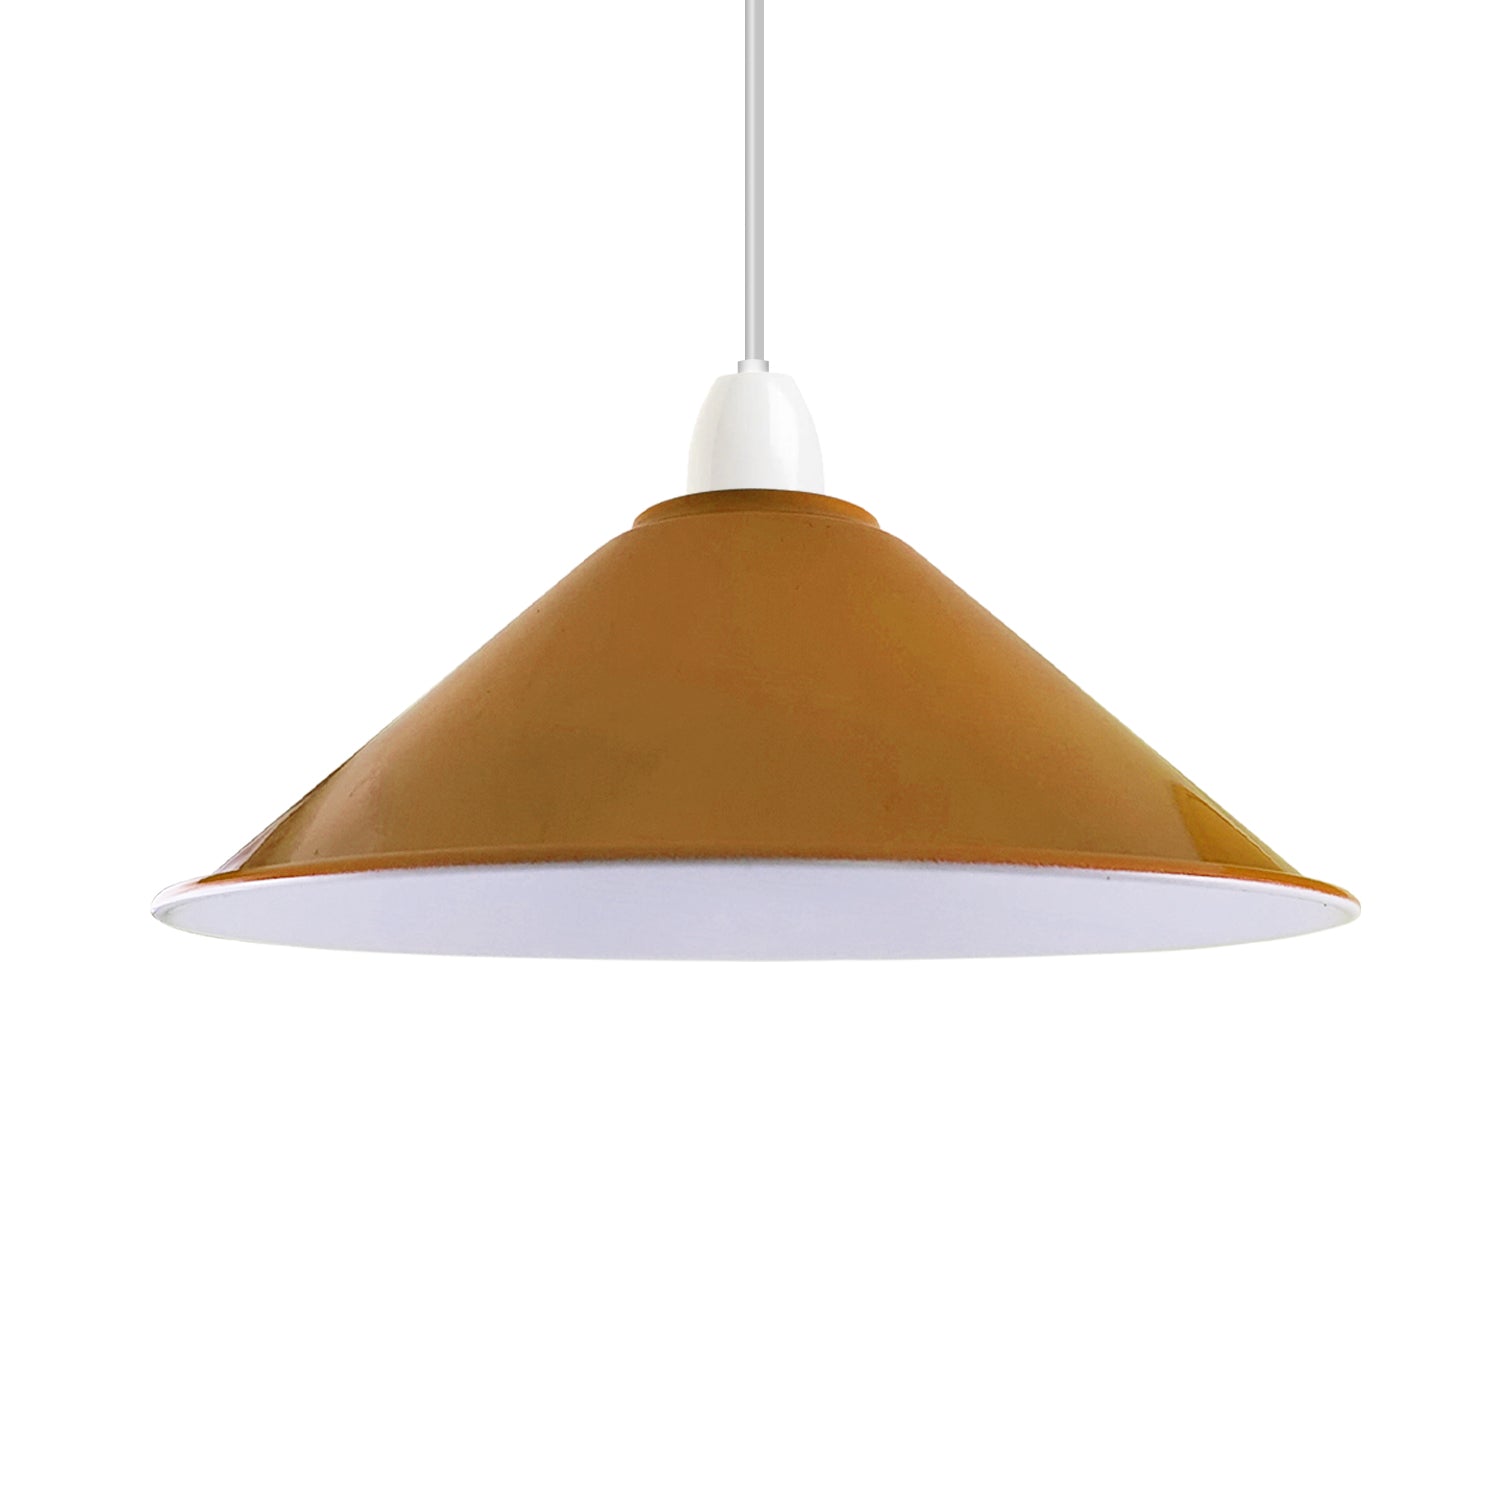 easy fit shade with a contrast inner. Height 22cm Diameter yellow shade